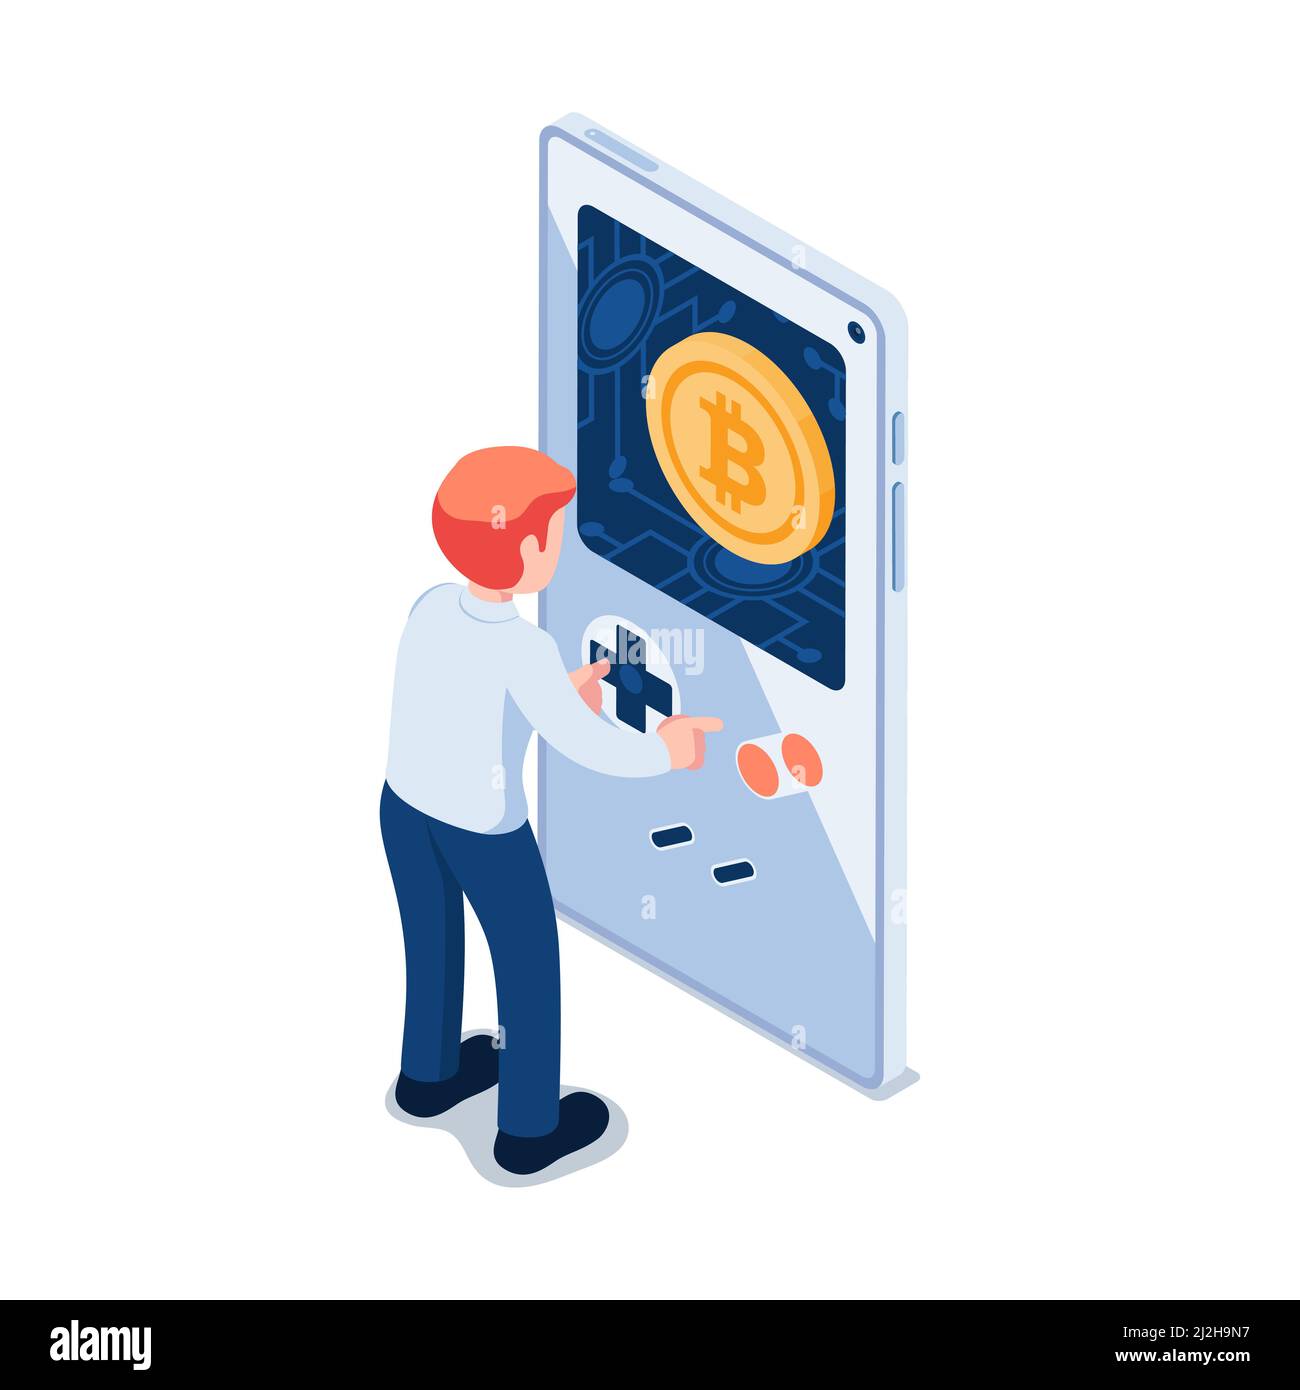 Flat 3d Isometric Businessman Playing Games on Smartphone and Earn Bitcoin. Play to Earn Concept. Stock Vector